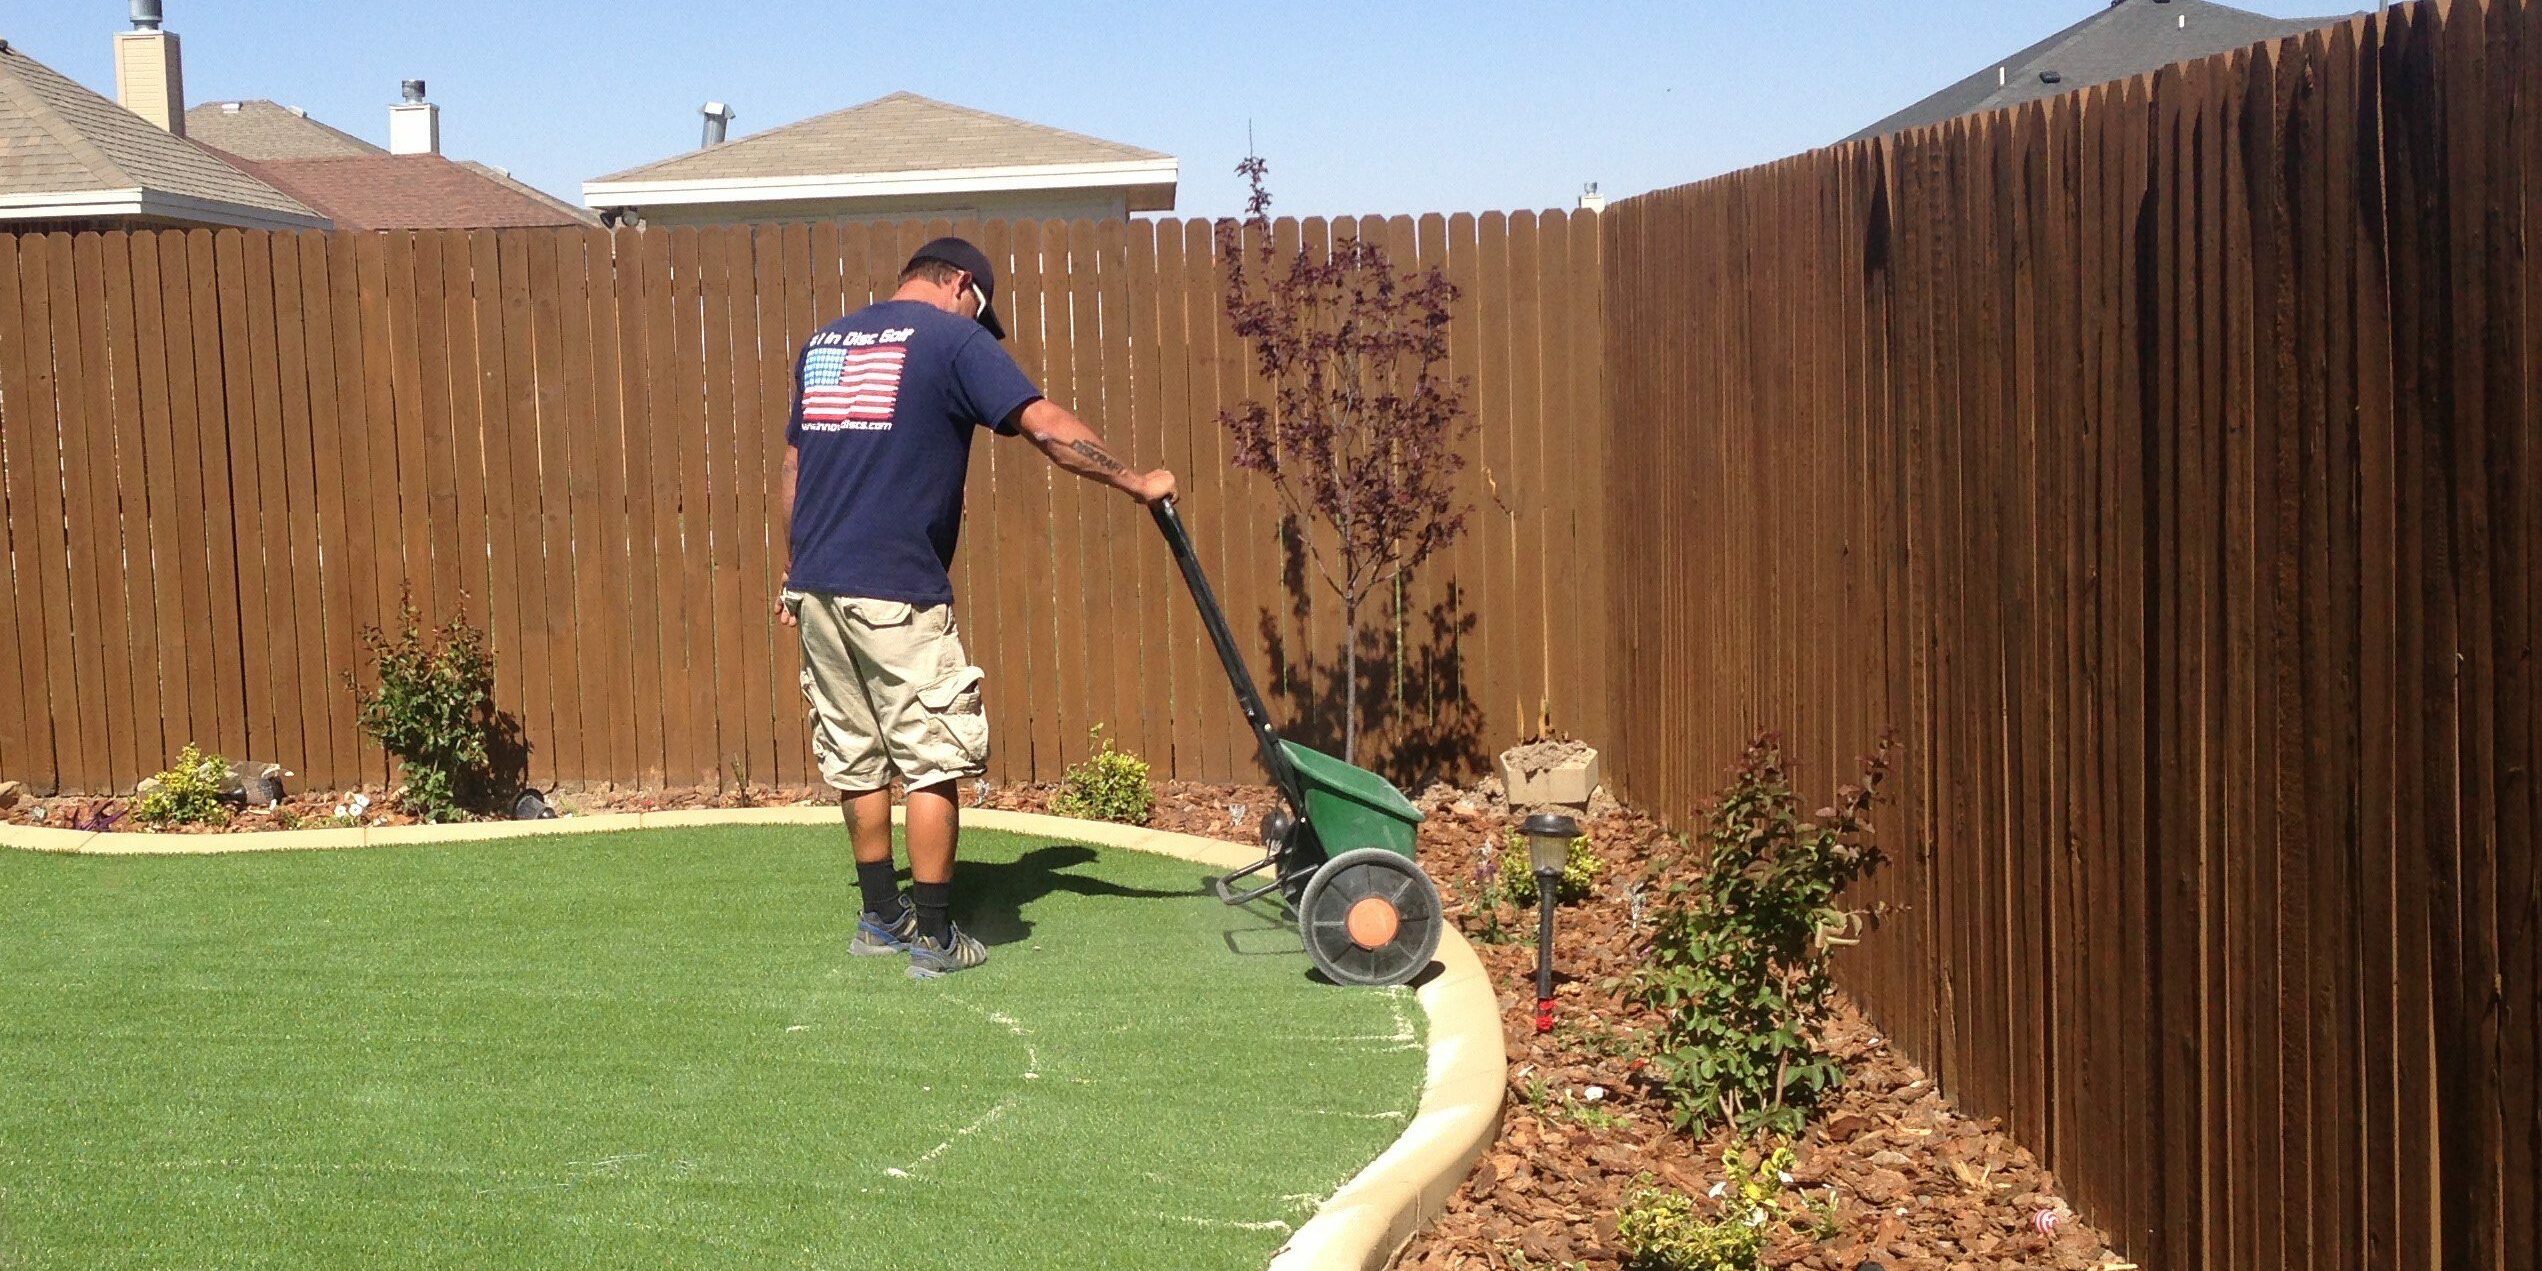 , 4 Facts About Installing a Sub-Base Under Your Artificial Turf